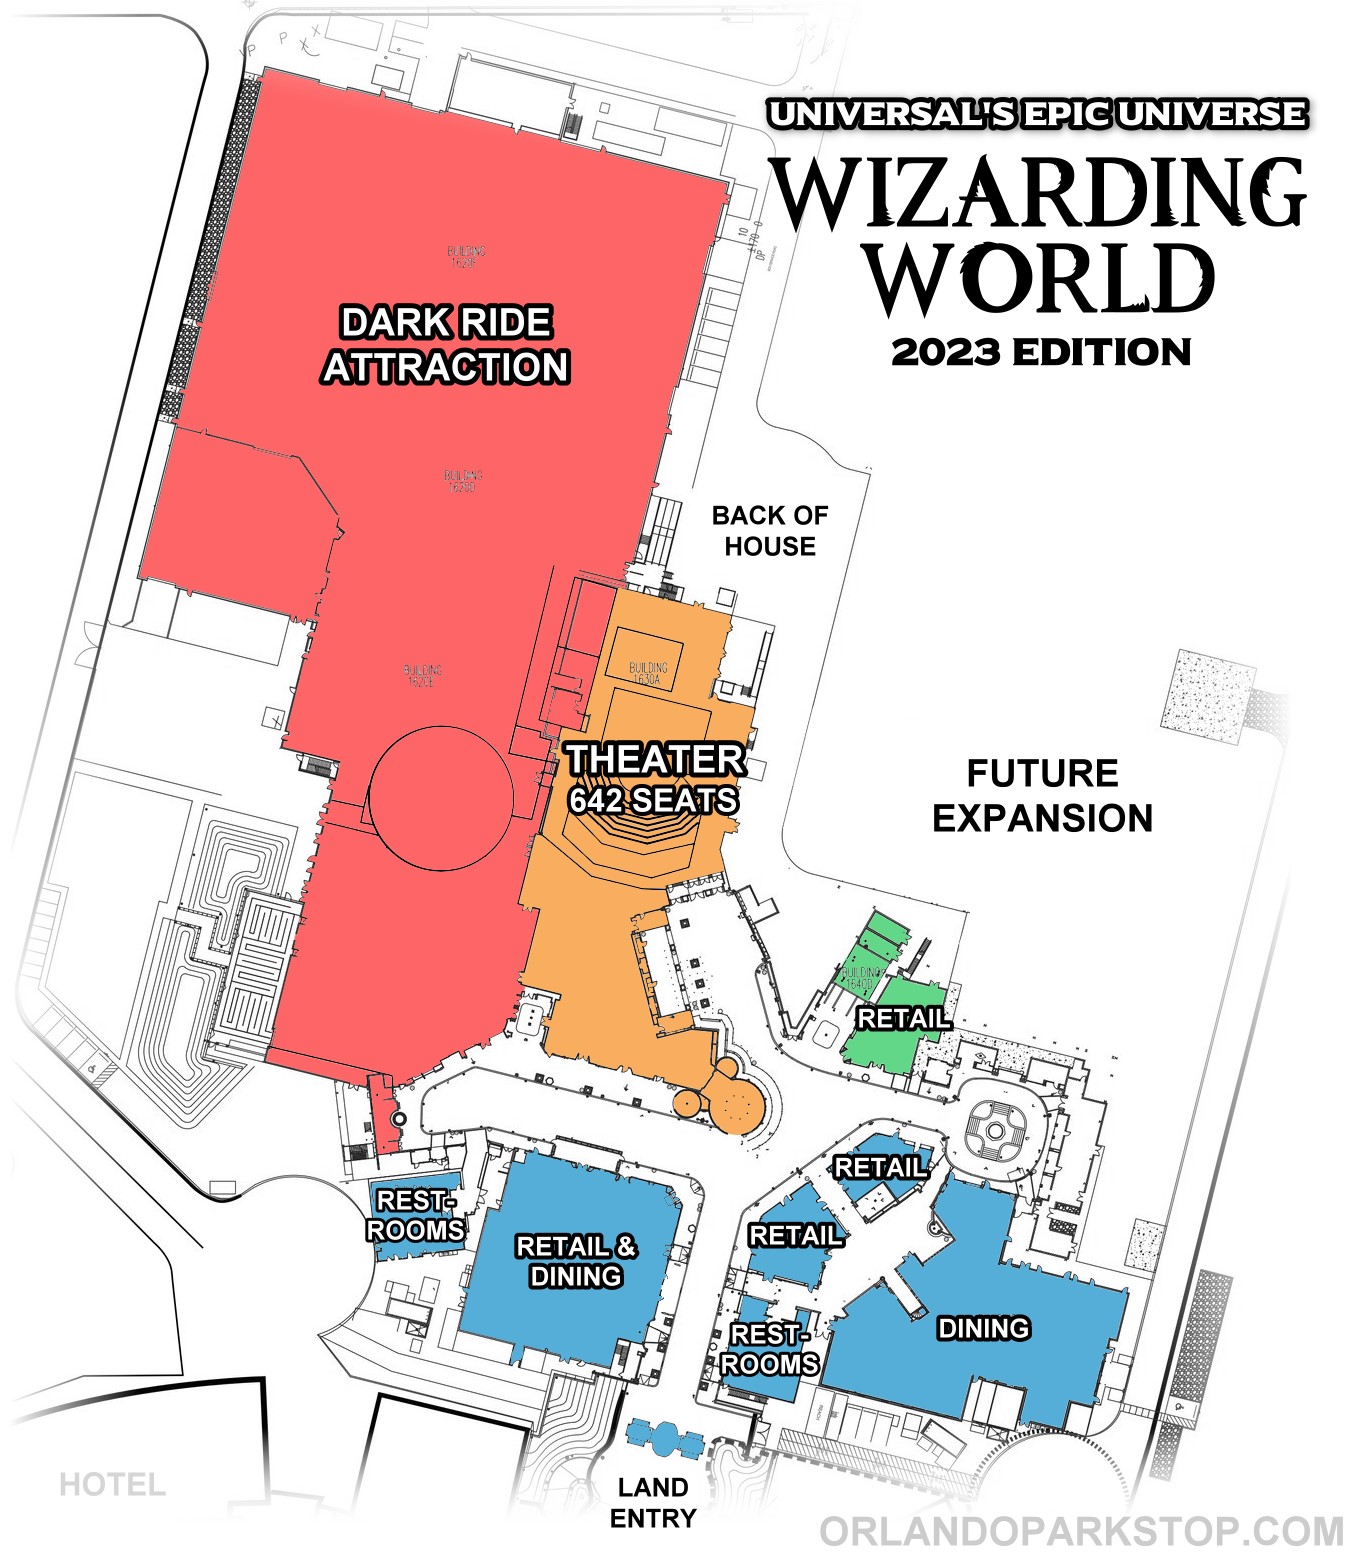 New Construction Updates for Wizarding World Land at Universal's Epic